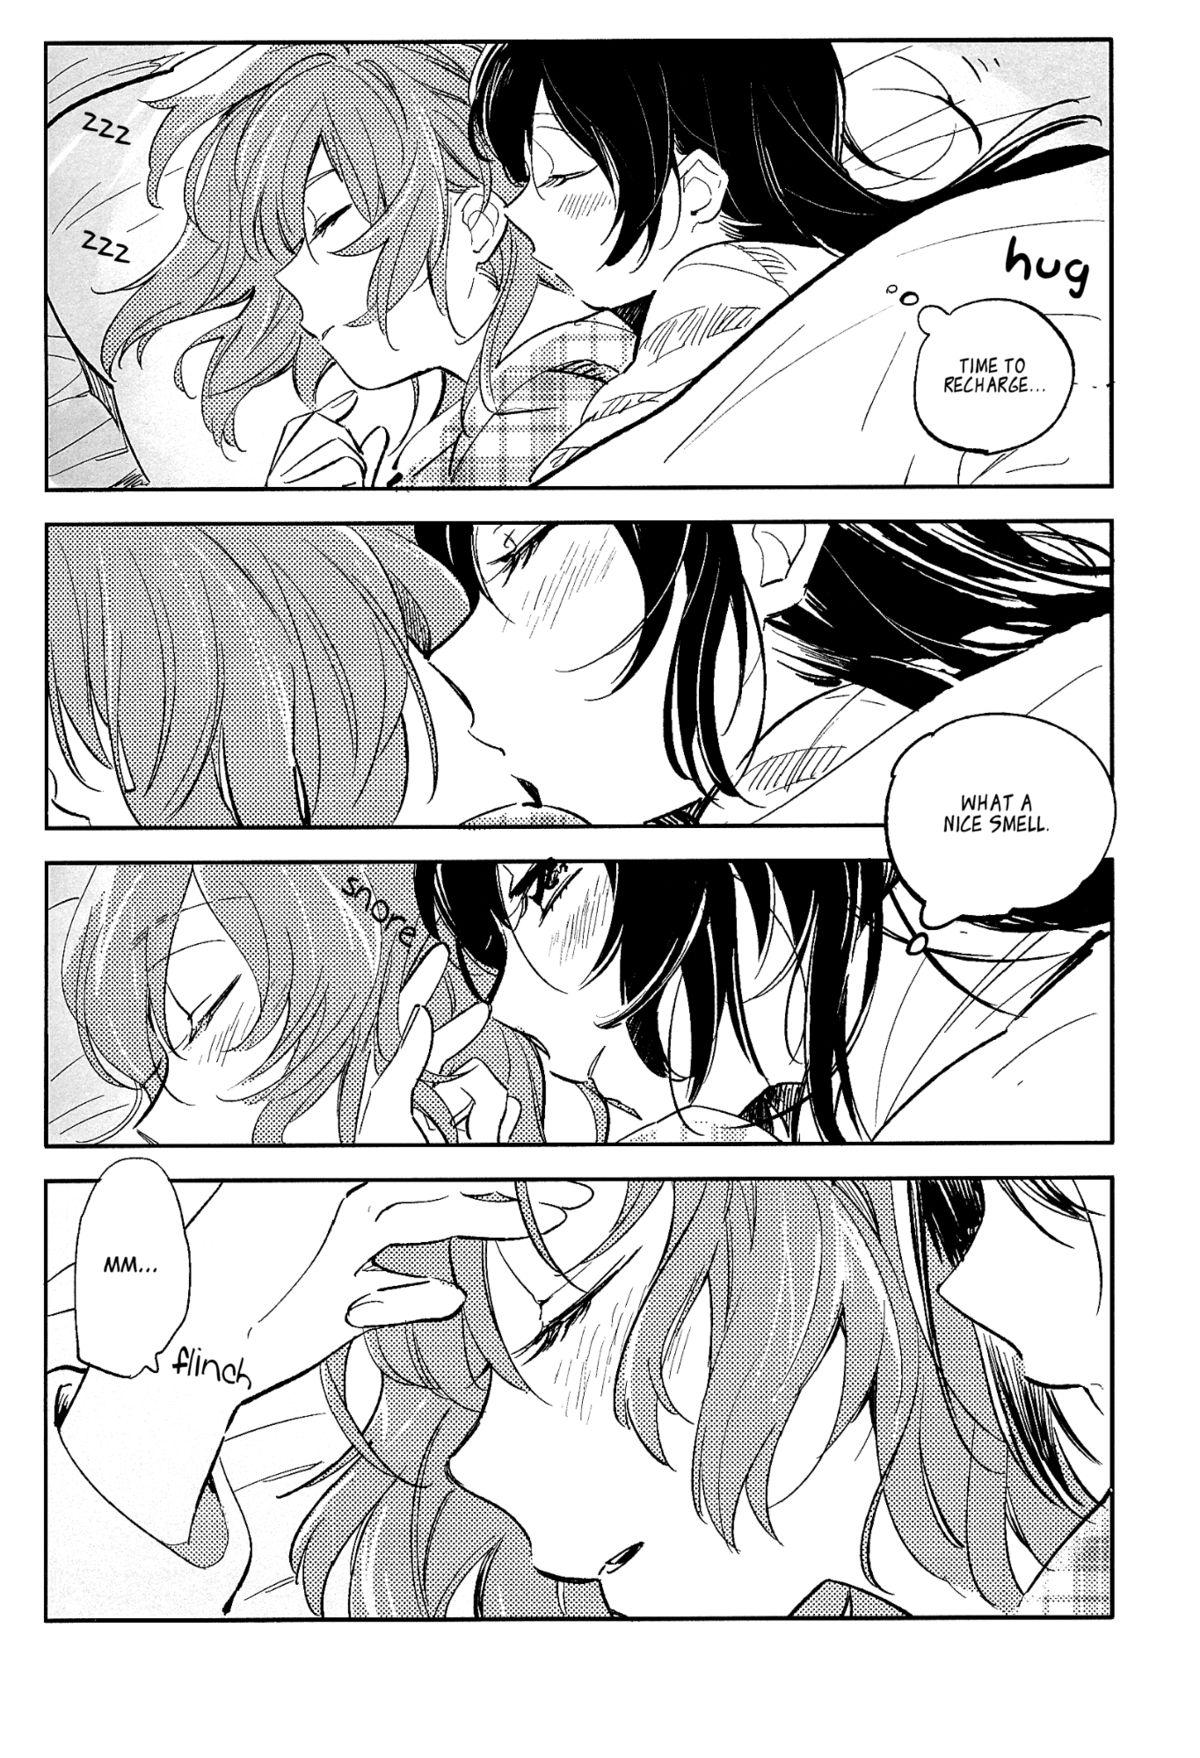 Canadian Koibito no Jikan | Time for Lovers - Love live With - Page 6